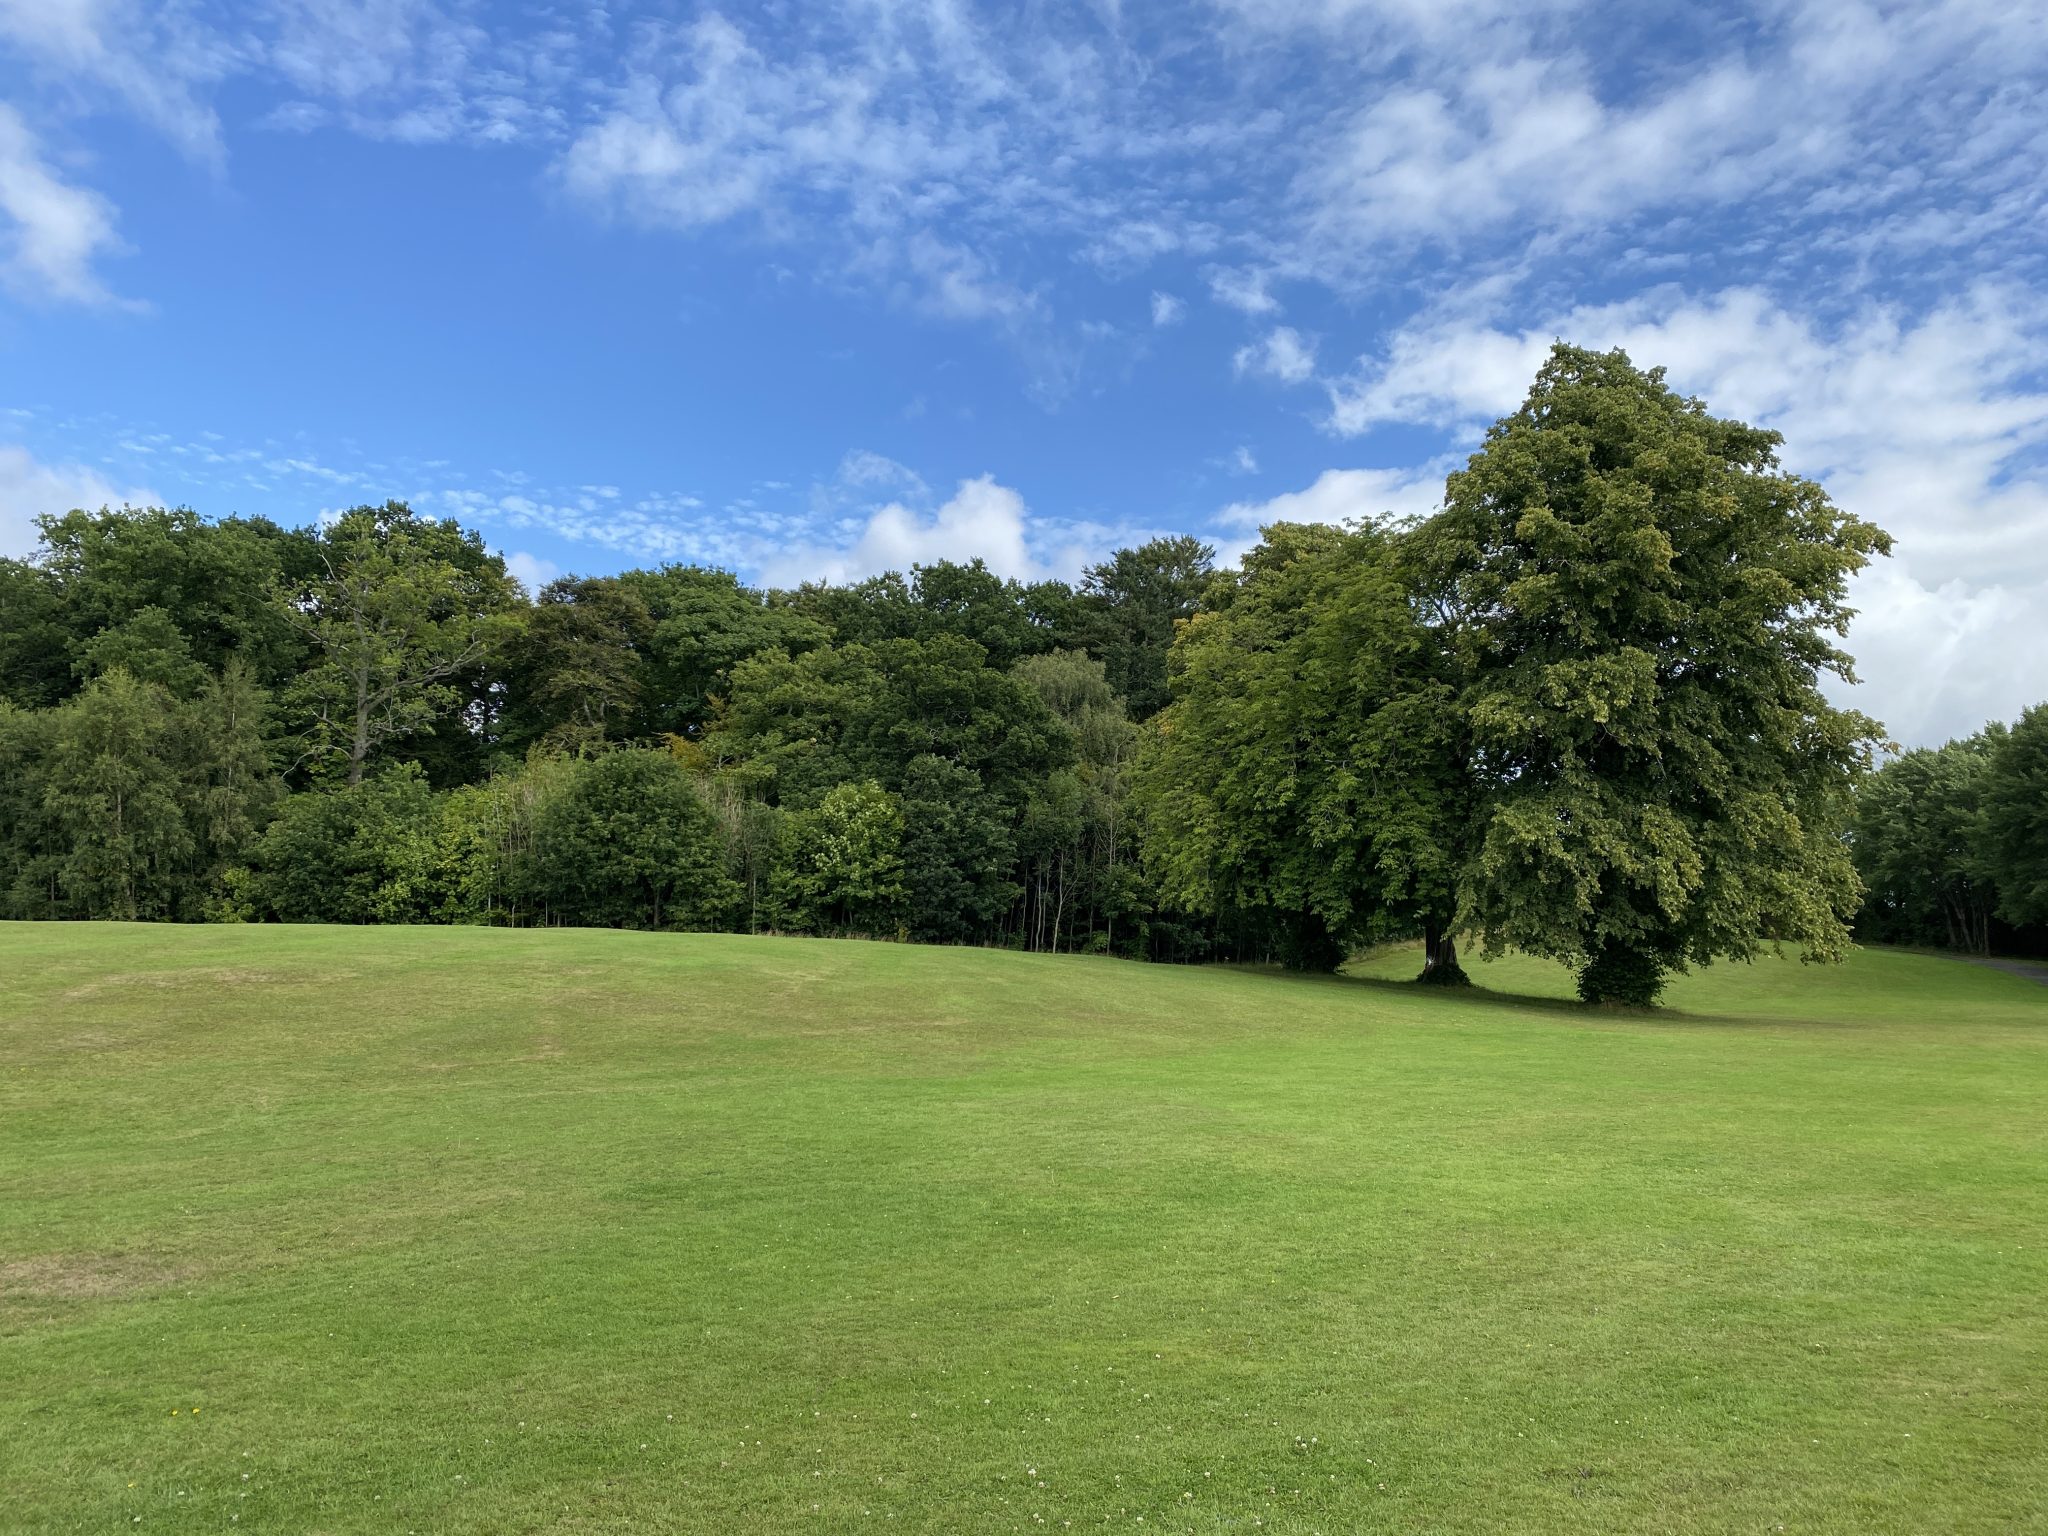 Field and tree line in the park